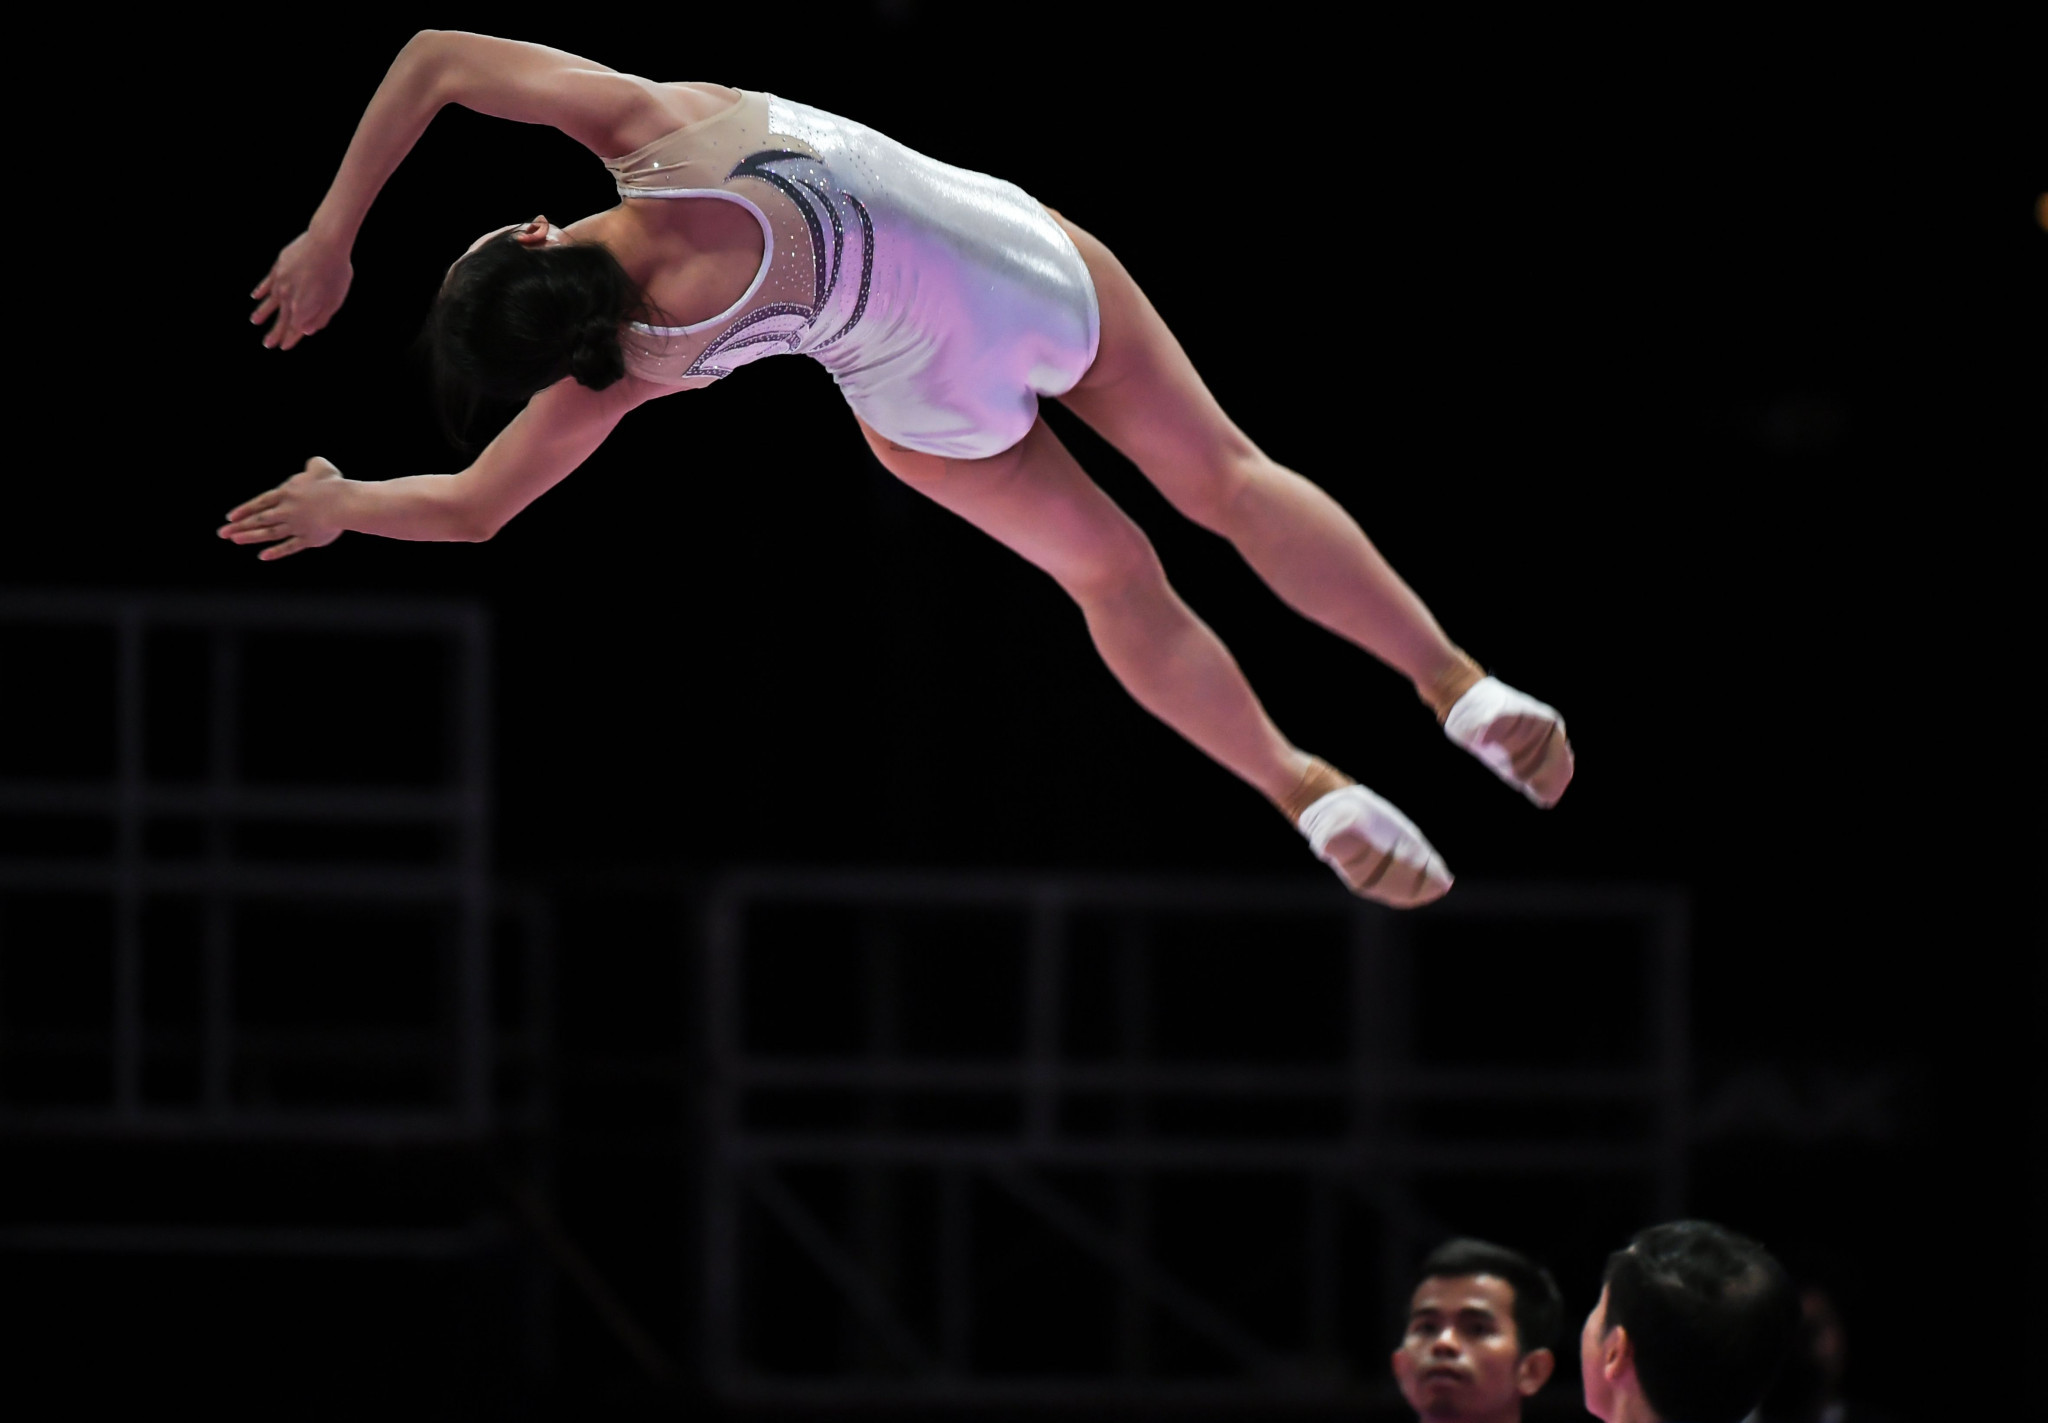 China's Liu Lingling triumphed in the woman's event at the FIG Trampoline World Cup in Baku ©Getty Images